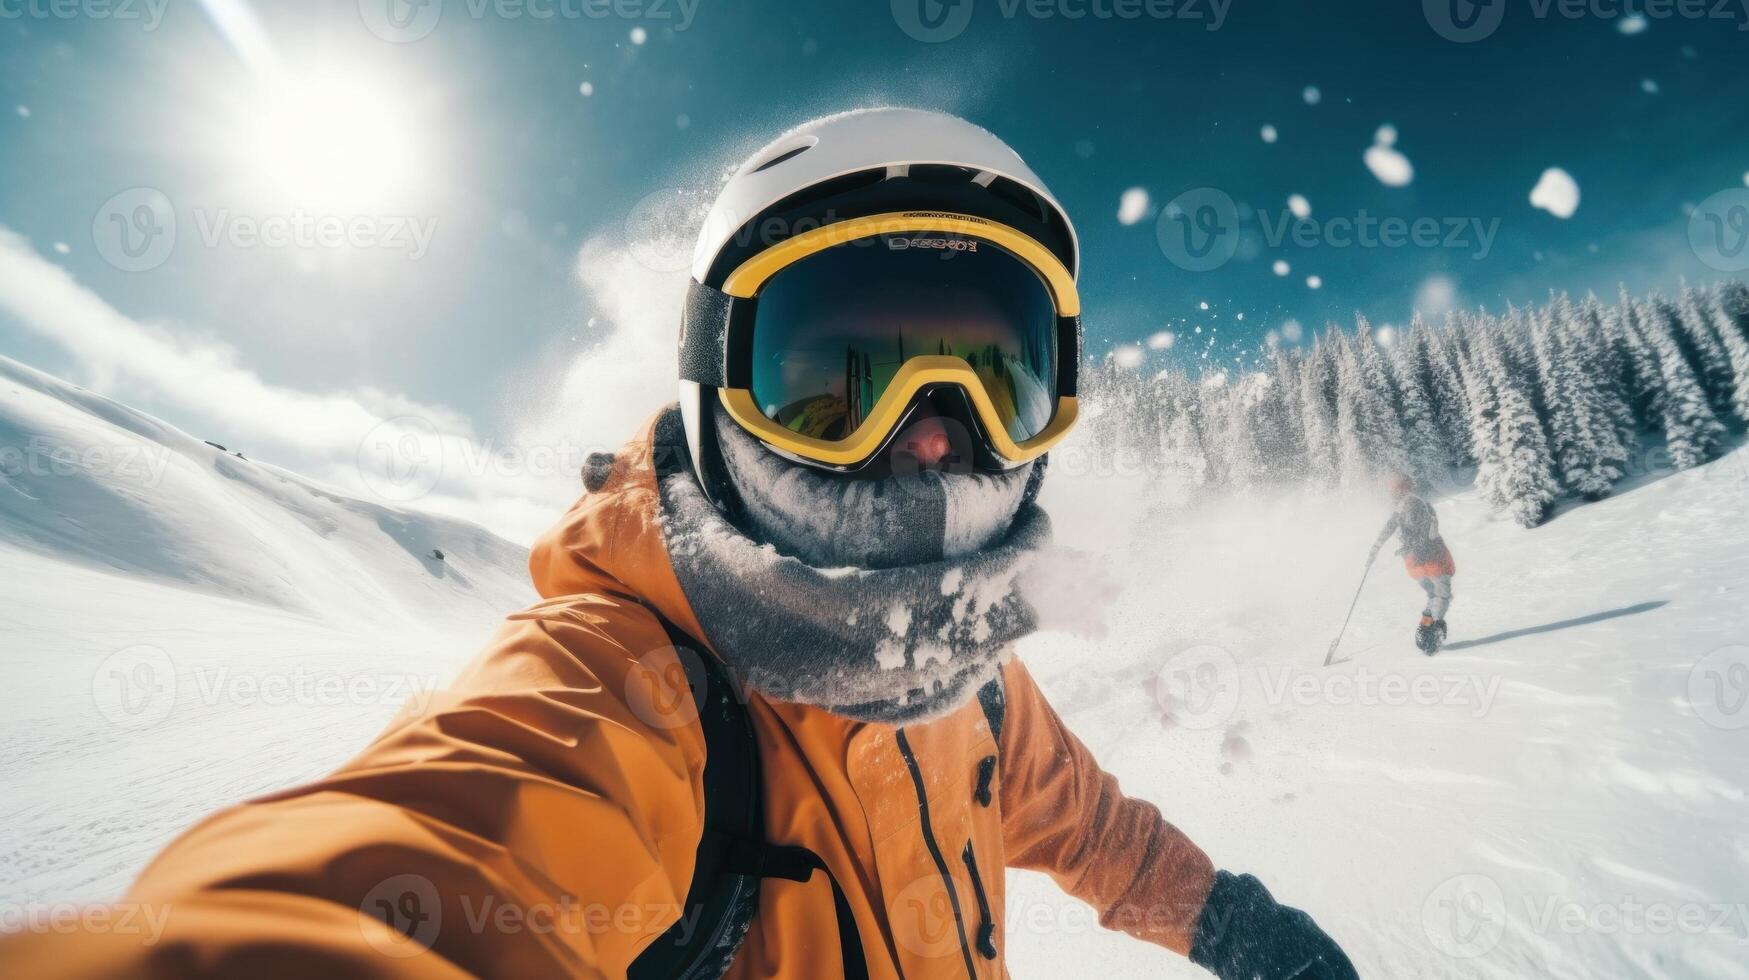 Snowboarder Captures Epic Moment in First-Person View. photo